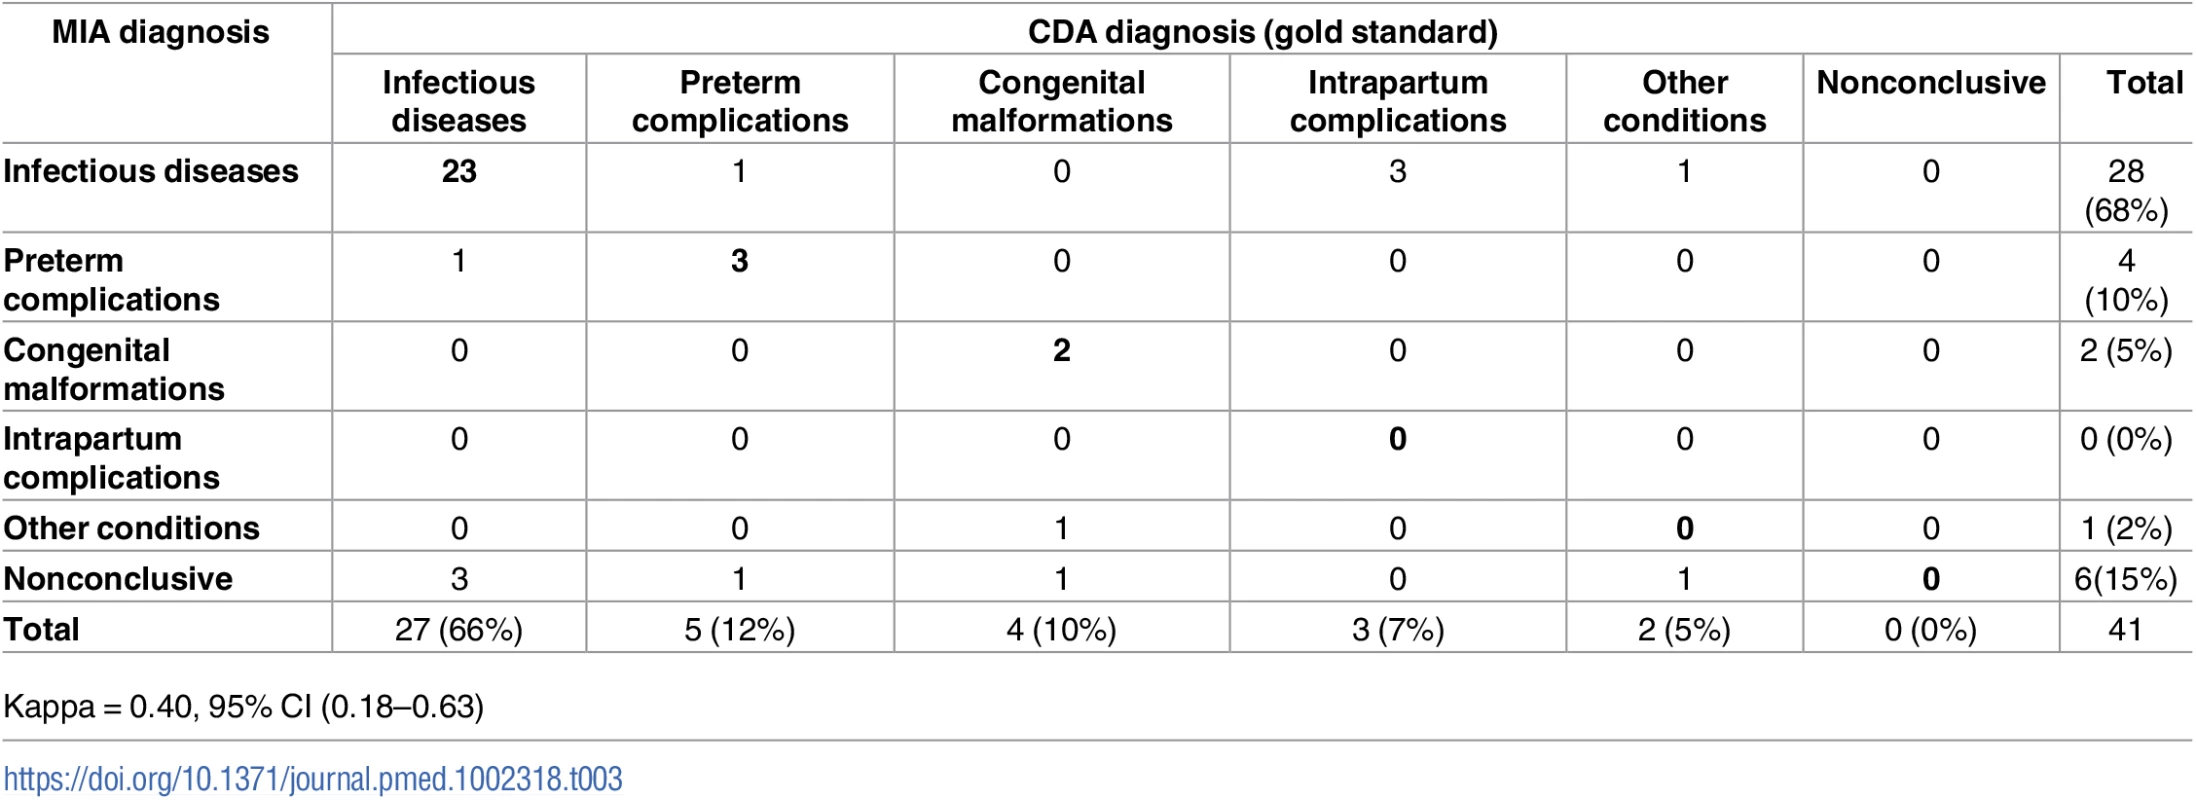 Concordance of the categorization of the cause of death established by the complete diagnostic autopsy (CDA, gold standard) and the minimally invasive (MIA) diagnosis in neonates.